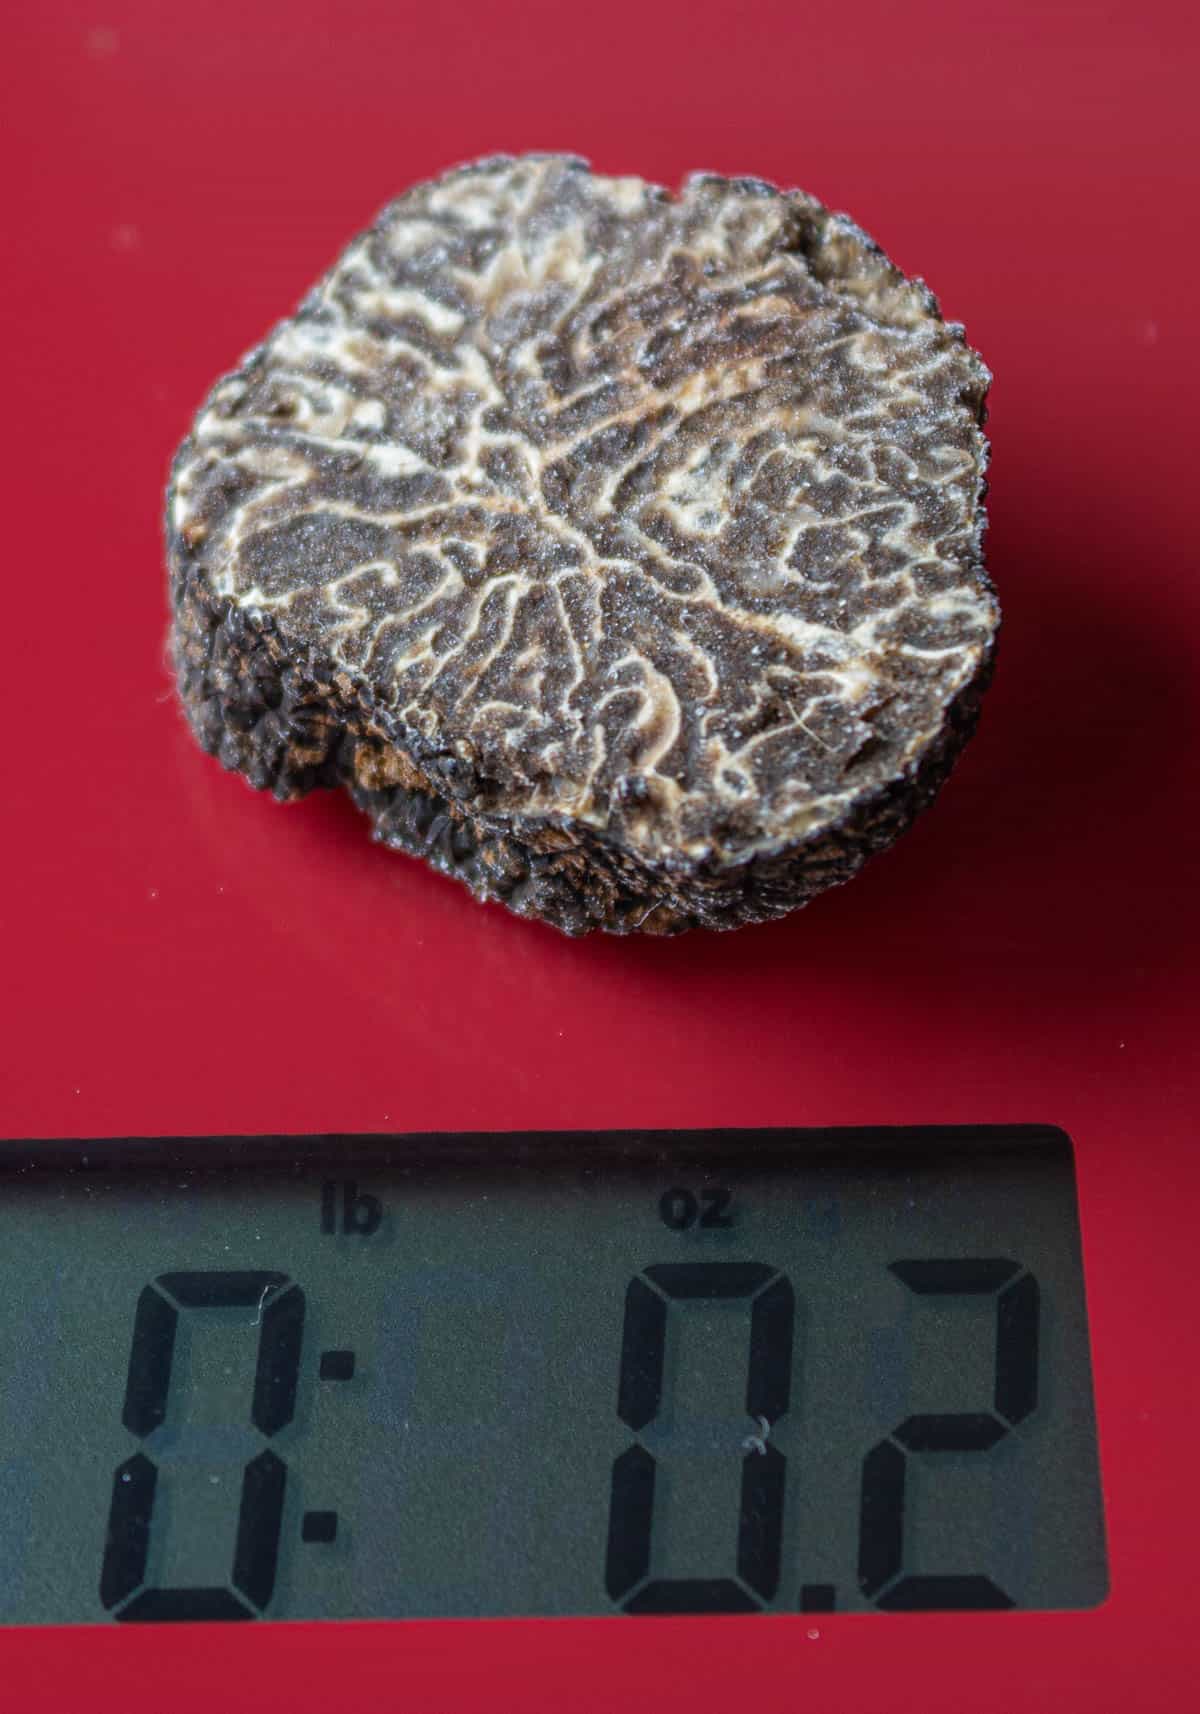 A sliced black truffle on a scale showing how much truffle you need for each person to make risotto. 